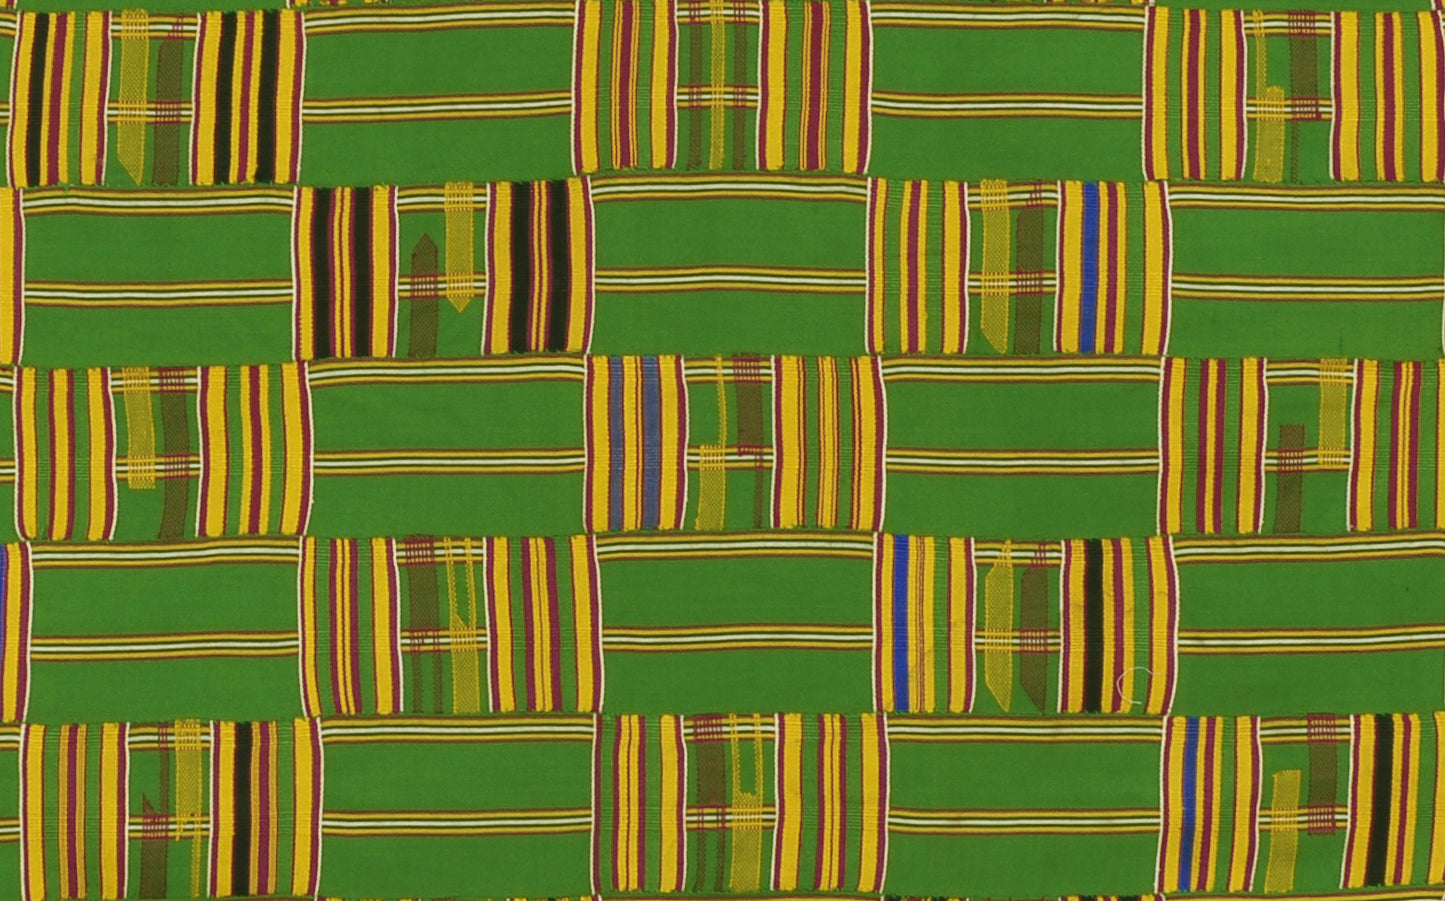 Authentic 1970s Ashanti Kente Cloth from Ghana - A Legacy of Weaving Excellence